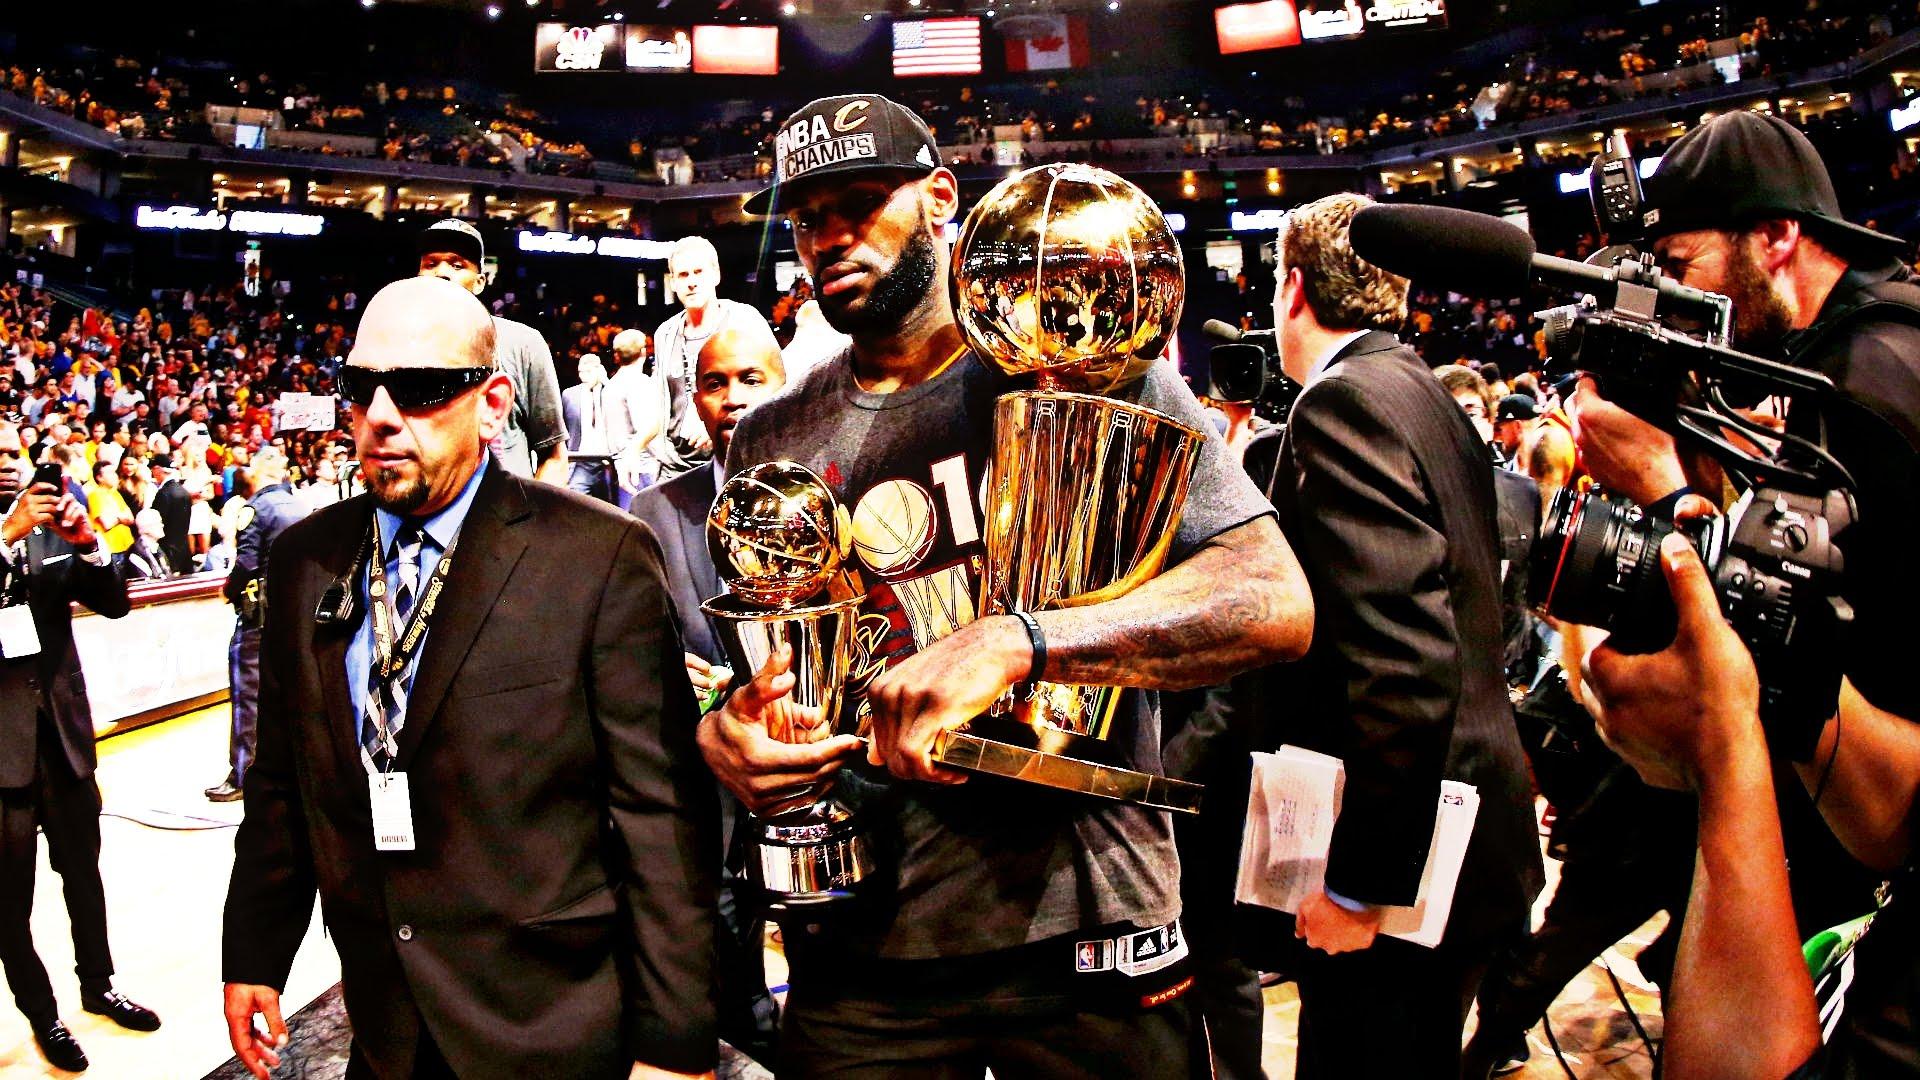 LeBron James, THIS IS FOR YOU! ᴴᴰ 2016 NBA Champion